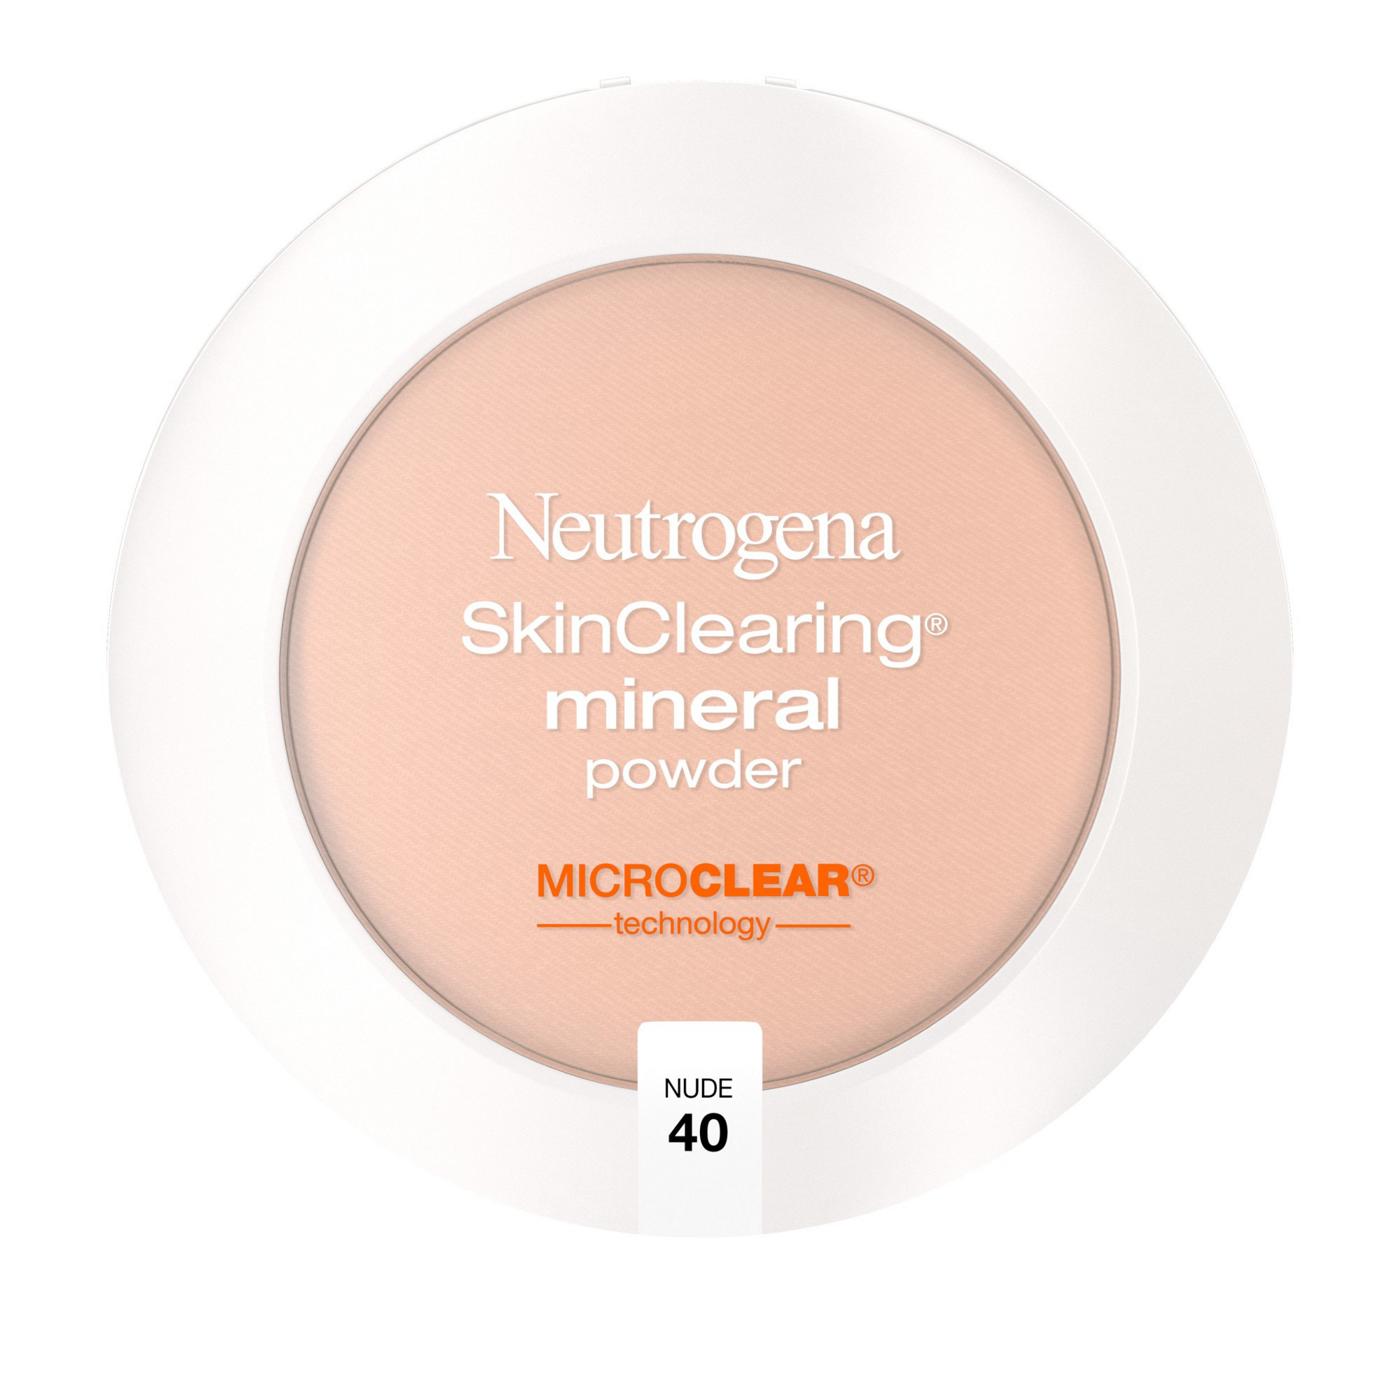 Neutrogena Skinclearing Mineral Powder 40 Nude; image 1 of 5